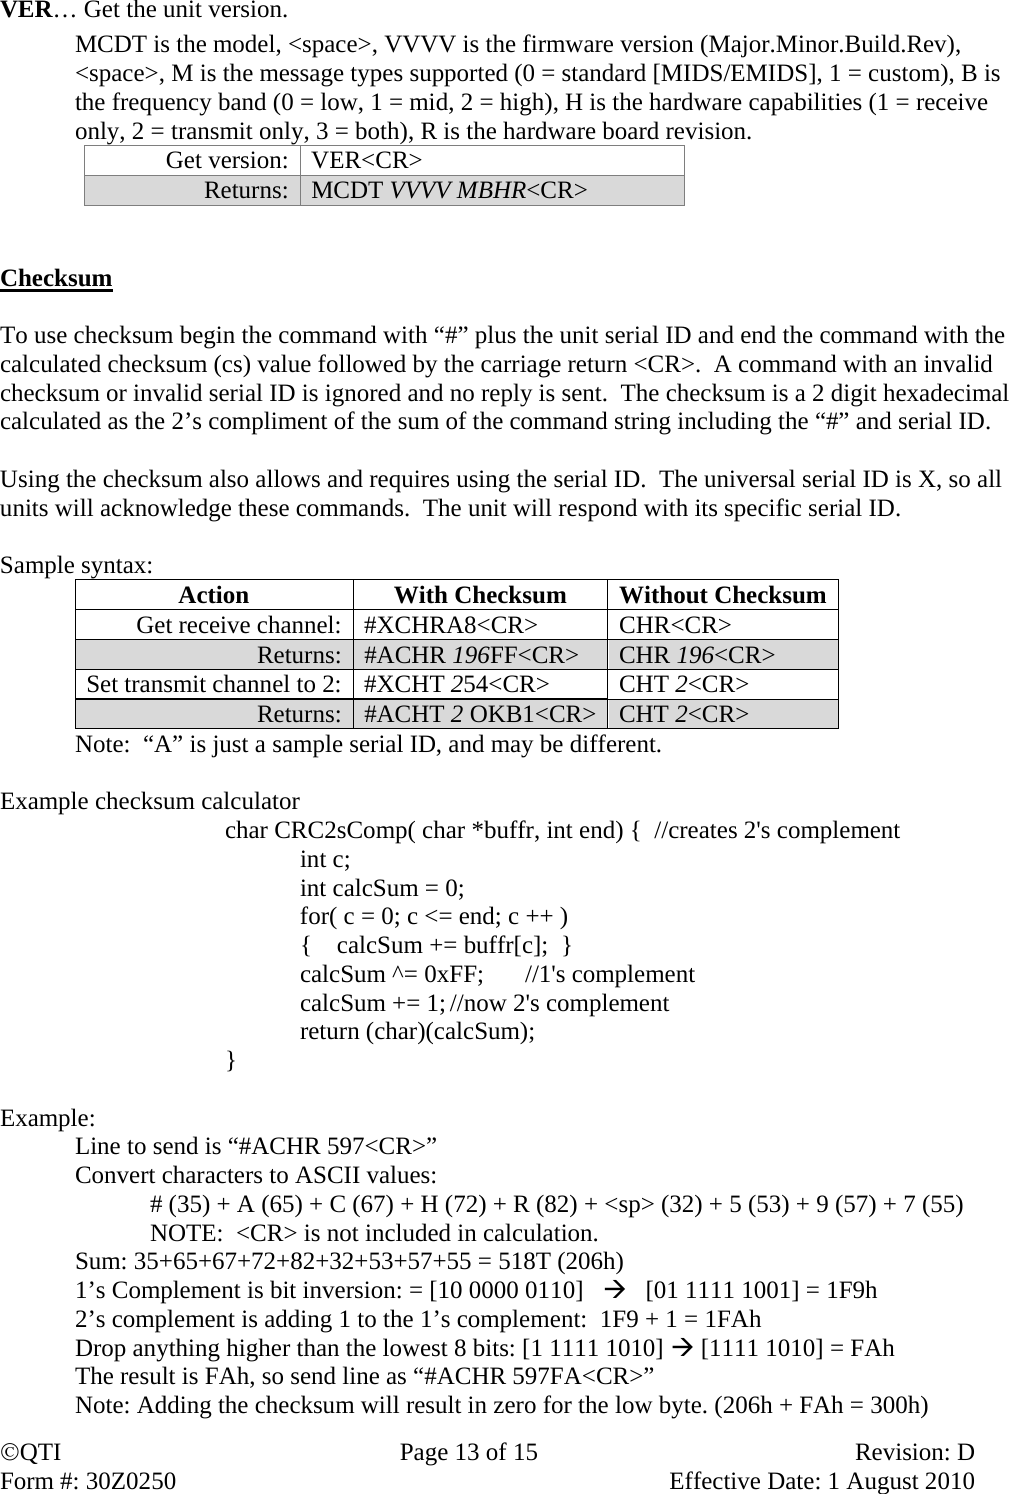 QTI  Page 13 of 15  Revision: D Form #: 30Z0250    Effective Date: 1 August 2010 VER… Get the unit version.    MCDT is the model, &lt;space&gt;, VVVV is the firmware version (Major.Minor.Build.Rev), &lt;space&gt;, M is the message types supported (0 = standard [MIDS/EMIDS], 1 = custom), B is the frequency band (0 = low, 1 = mid, 2 = high), H is the hardware capabilities (1 = receive only, 2 = transmit only, 3 = both), R is the hardware board revision. Get version:  VER&lt;CR&gt; Returns:  MCDT VVVV MBHR&lt;CR&gt;   Checksum  To use checksum begin the command with “#” plus the unit serial ID and end the command with the calculated checksum (cs) value followed by the carriage return &lt;CR&gt;.  A command with an invalid checksum or invalid serial ID is ignored and no reply is sent.  The checksum is a 2 digit hexadecimal calculated as the 2’s compliment of the sum of the command string including the “#” and serial ID.    Using the checksum also allows and requires using the serial ID.  The universal serial ID is X, so all units will acknowledge these commands.  The unit will respond with its specific serial ID.  Sample syntax:  Action  With Checksum  Without Checksum Get receive channel:  #XCHRA8&lt;CR&gt;  CHR&lt;CR&gt; Returns:  #ACHR 196FF&lt;CR&gt;  CHR 196&lt;CR&gt; Set transmit channel to 2:  #XCHT 254&lt;CR&gt; CHT 2&lt;CR&gt; Returns:  #ACHT 2 OKB1&lt;CR&gt; CHT 2&lt;CR&gt;   Note:  “A” is just a sample serial ID, and may be different.  Example checksum calculator char CRC2sComp( char *buffr, int end) {  //creates 2&apos;s complement    int c;   int calcSum = 0;   for( c = 0; c &lt;= end; c ++ )   {    calcSum += buffr[c];  }   calcSum ^= 0xFF;  //1&apos;s complement   calcSum += 1; //now 2&apos;s complement  return (char)(calcSum); }  Example: Line to send is “#ACHR 597&lt;CR&gt;” Convert characters to ASCII values:  # (35) + A (65) + C (67) + H (72) + R (82) + &lt;sp&gt; (32) + 5 (53) + 9 (57) + 7 (55)   NOTE:  &lt;CR&gt; is not included in calculation. Sum: 35+65+67+72+82+32+53+57+55 = 518T (206h) 1’s Complement is bit inversion: = [10 0000 0110]      [01 1111 1001] = 1F9h 2’s complement is adding 1 to the 1’s complement:  1F9 + 1 = 1FAh Drop anything higher than the lowest 8 bits: [1 1111 1010]  [1111 1010] = FAh The result is FAh, so send line as “#ACHR 597FA&lt;CR&gt;” Note: Adding the checksum will result in zero for the low byte. (206h + FAh = 300h) 